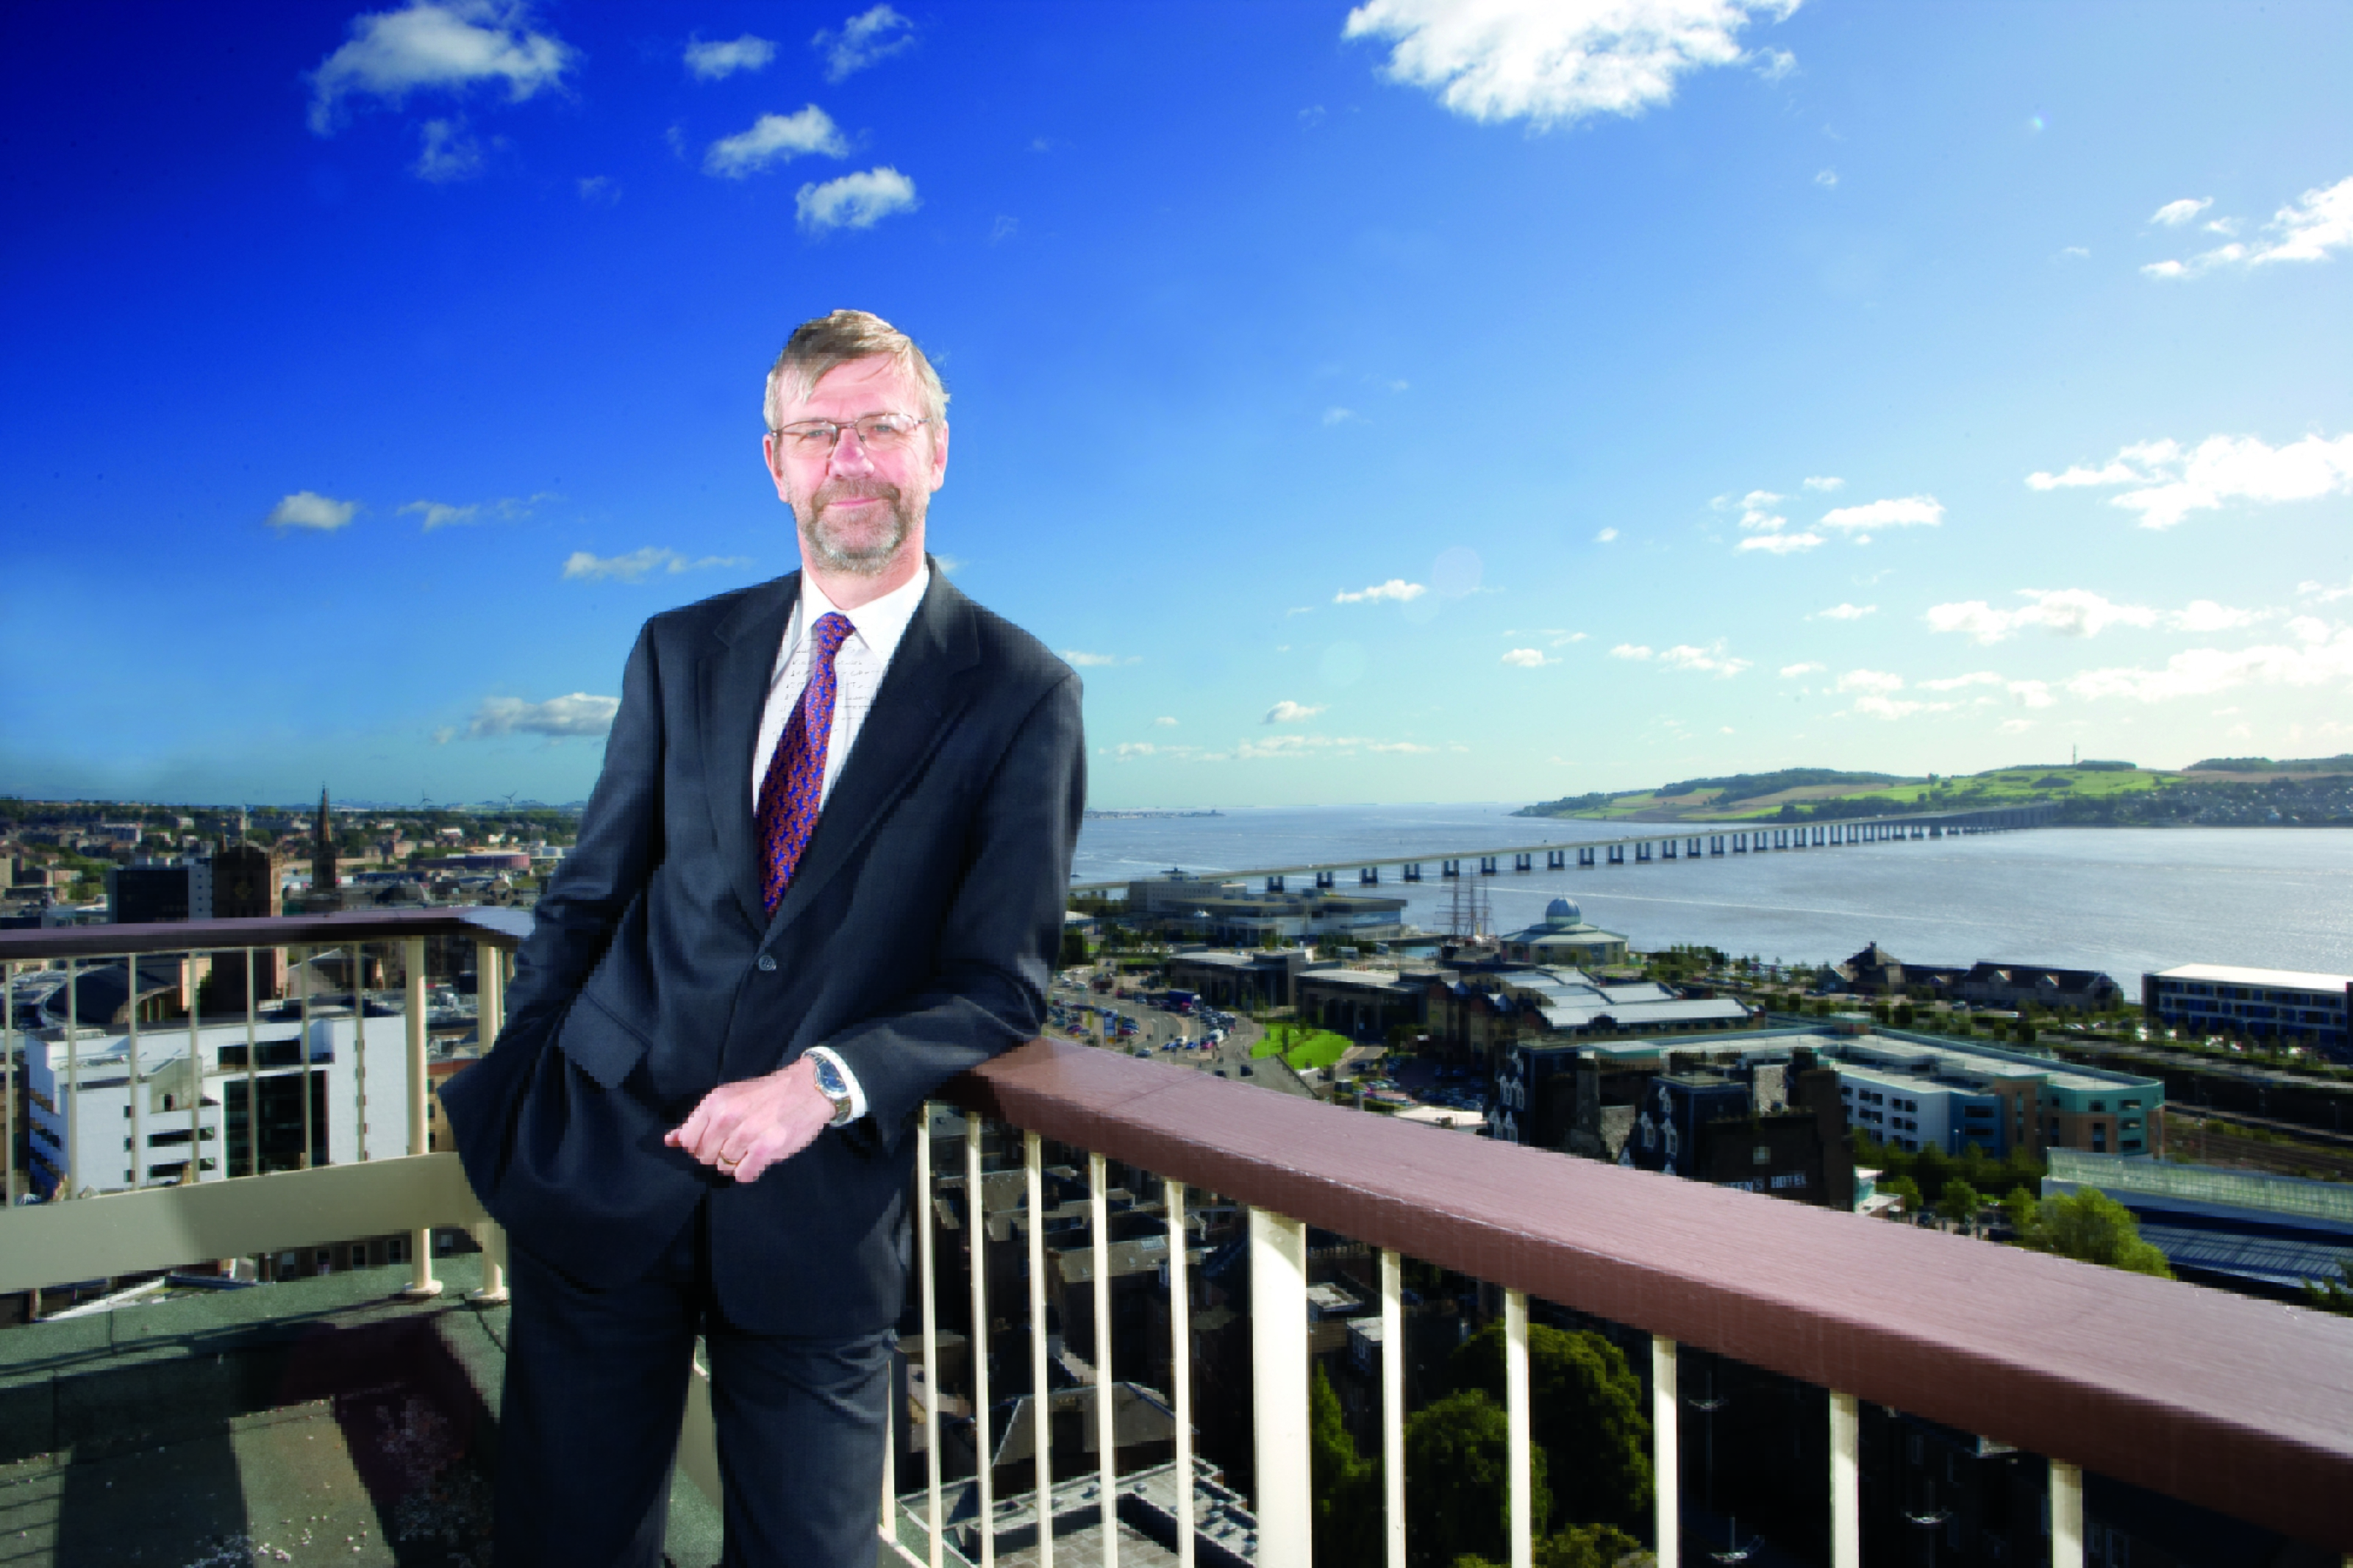 Professor Sir Pete Downes, Principal and Vice-Chancellor of the University of Dundee